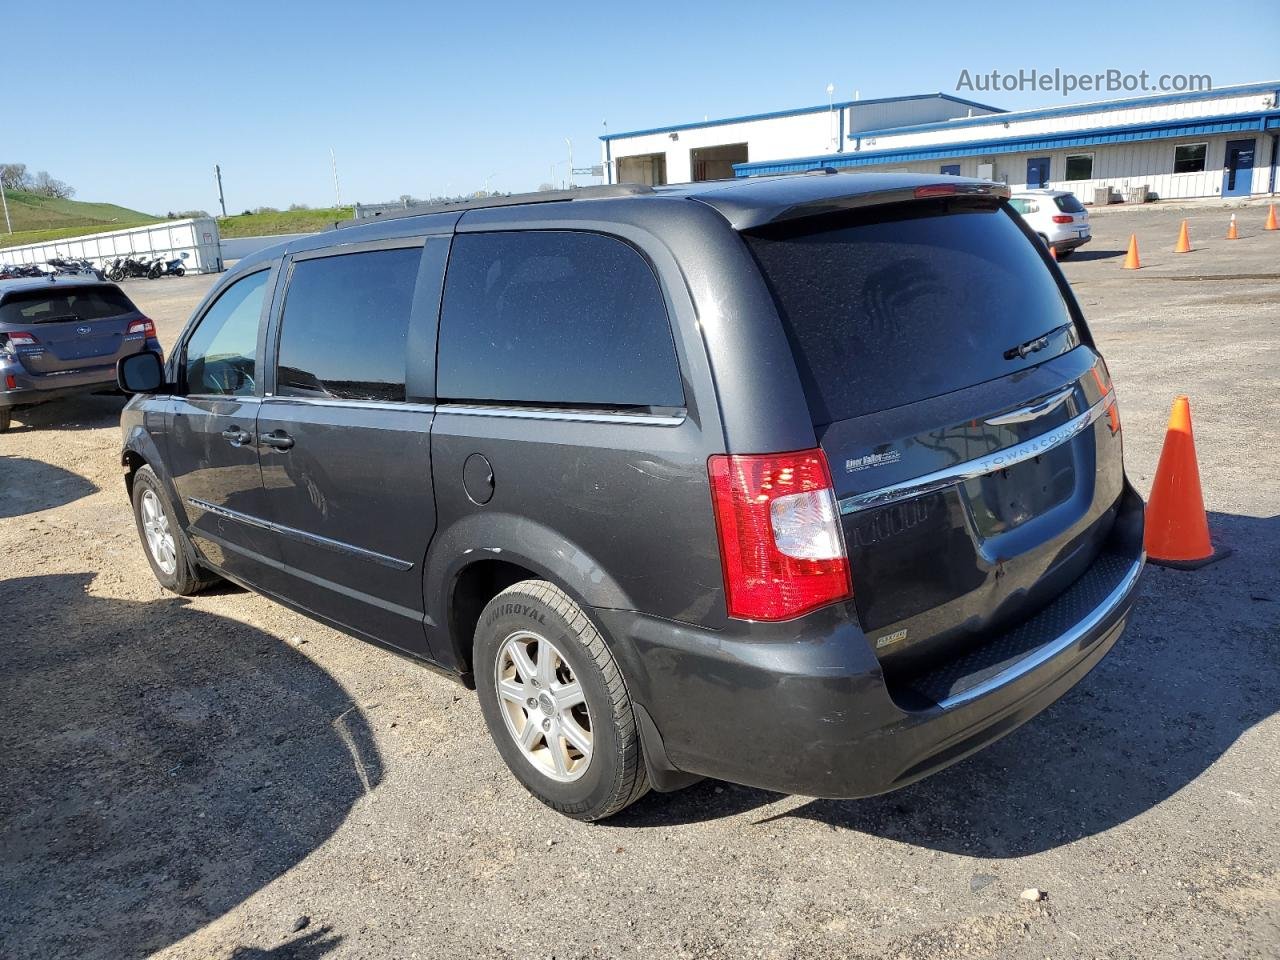 2011 Chrysler Town & Country Touring Gray vin: 2A4RR5DG7BR727060